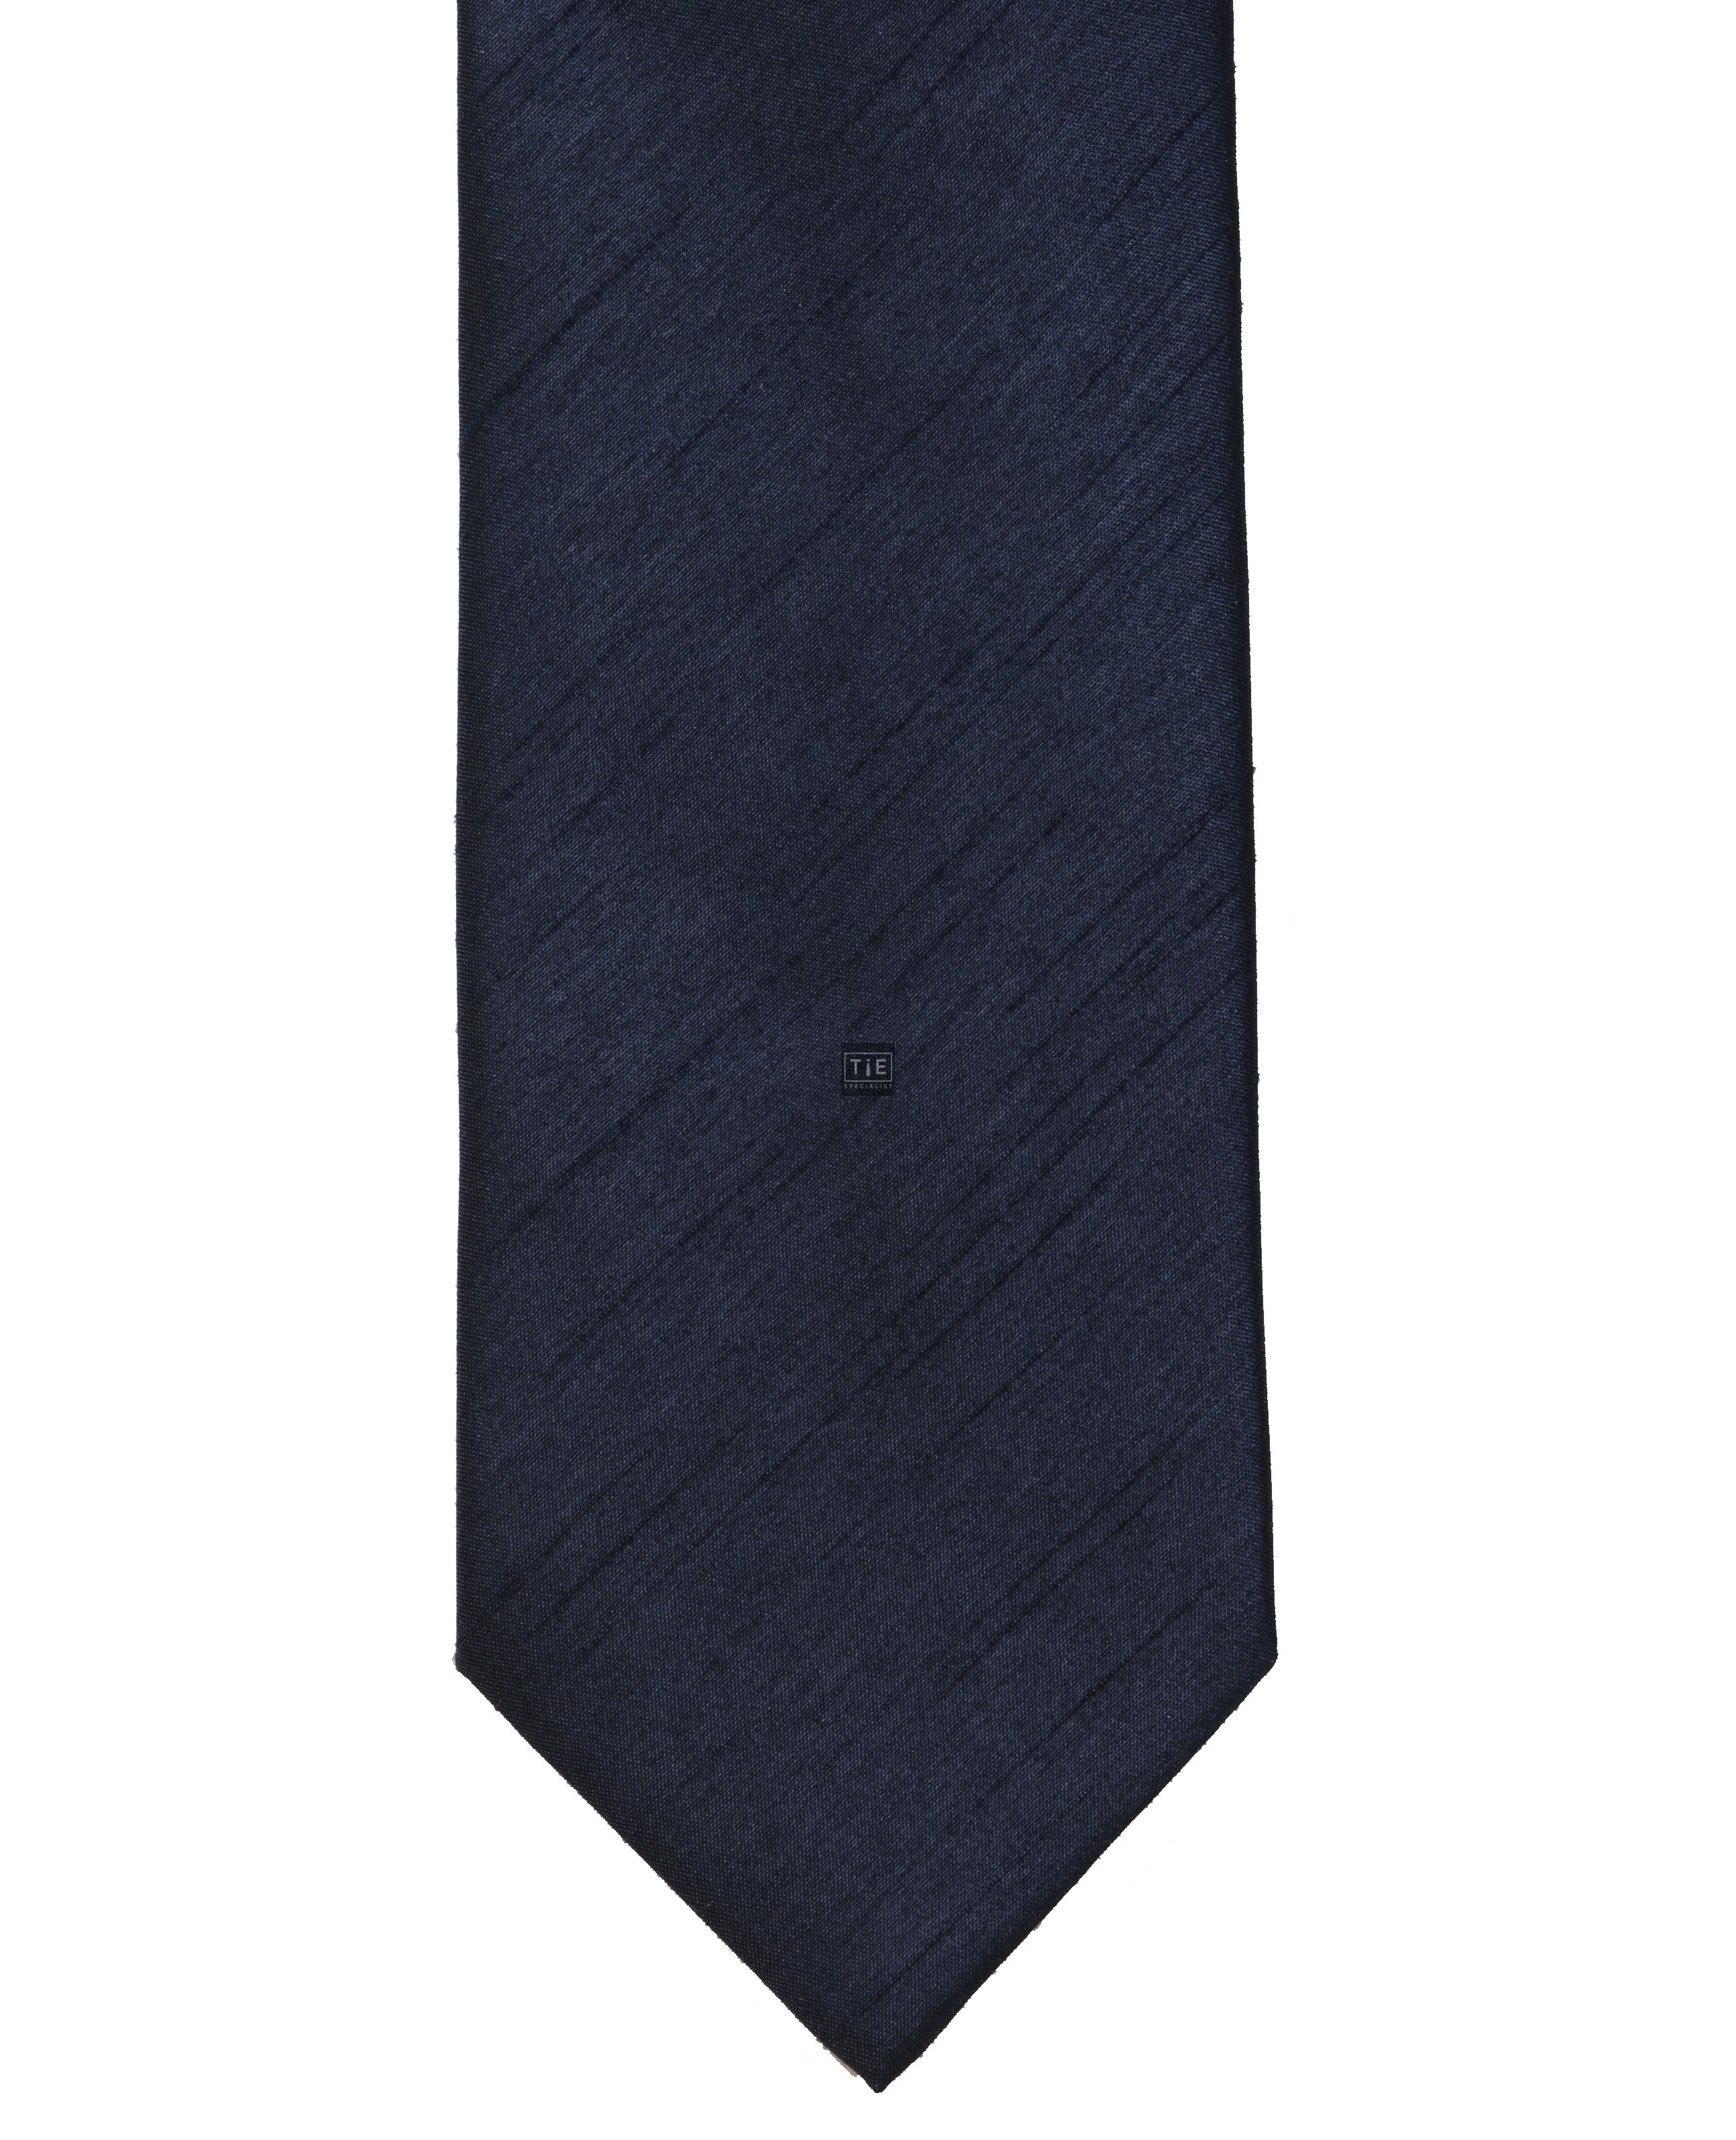 Navy Shantung Tie with Matching Pocket Hankie